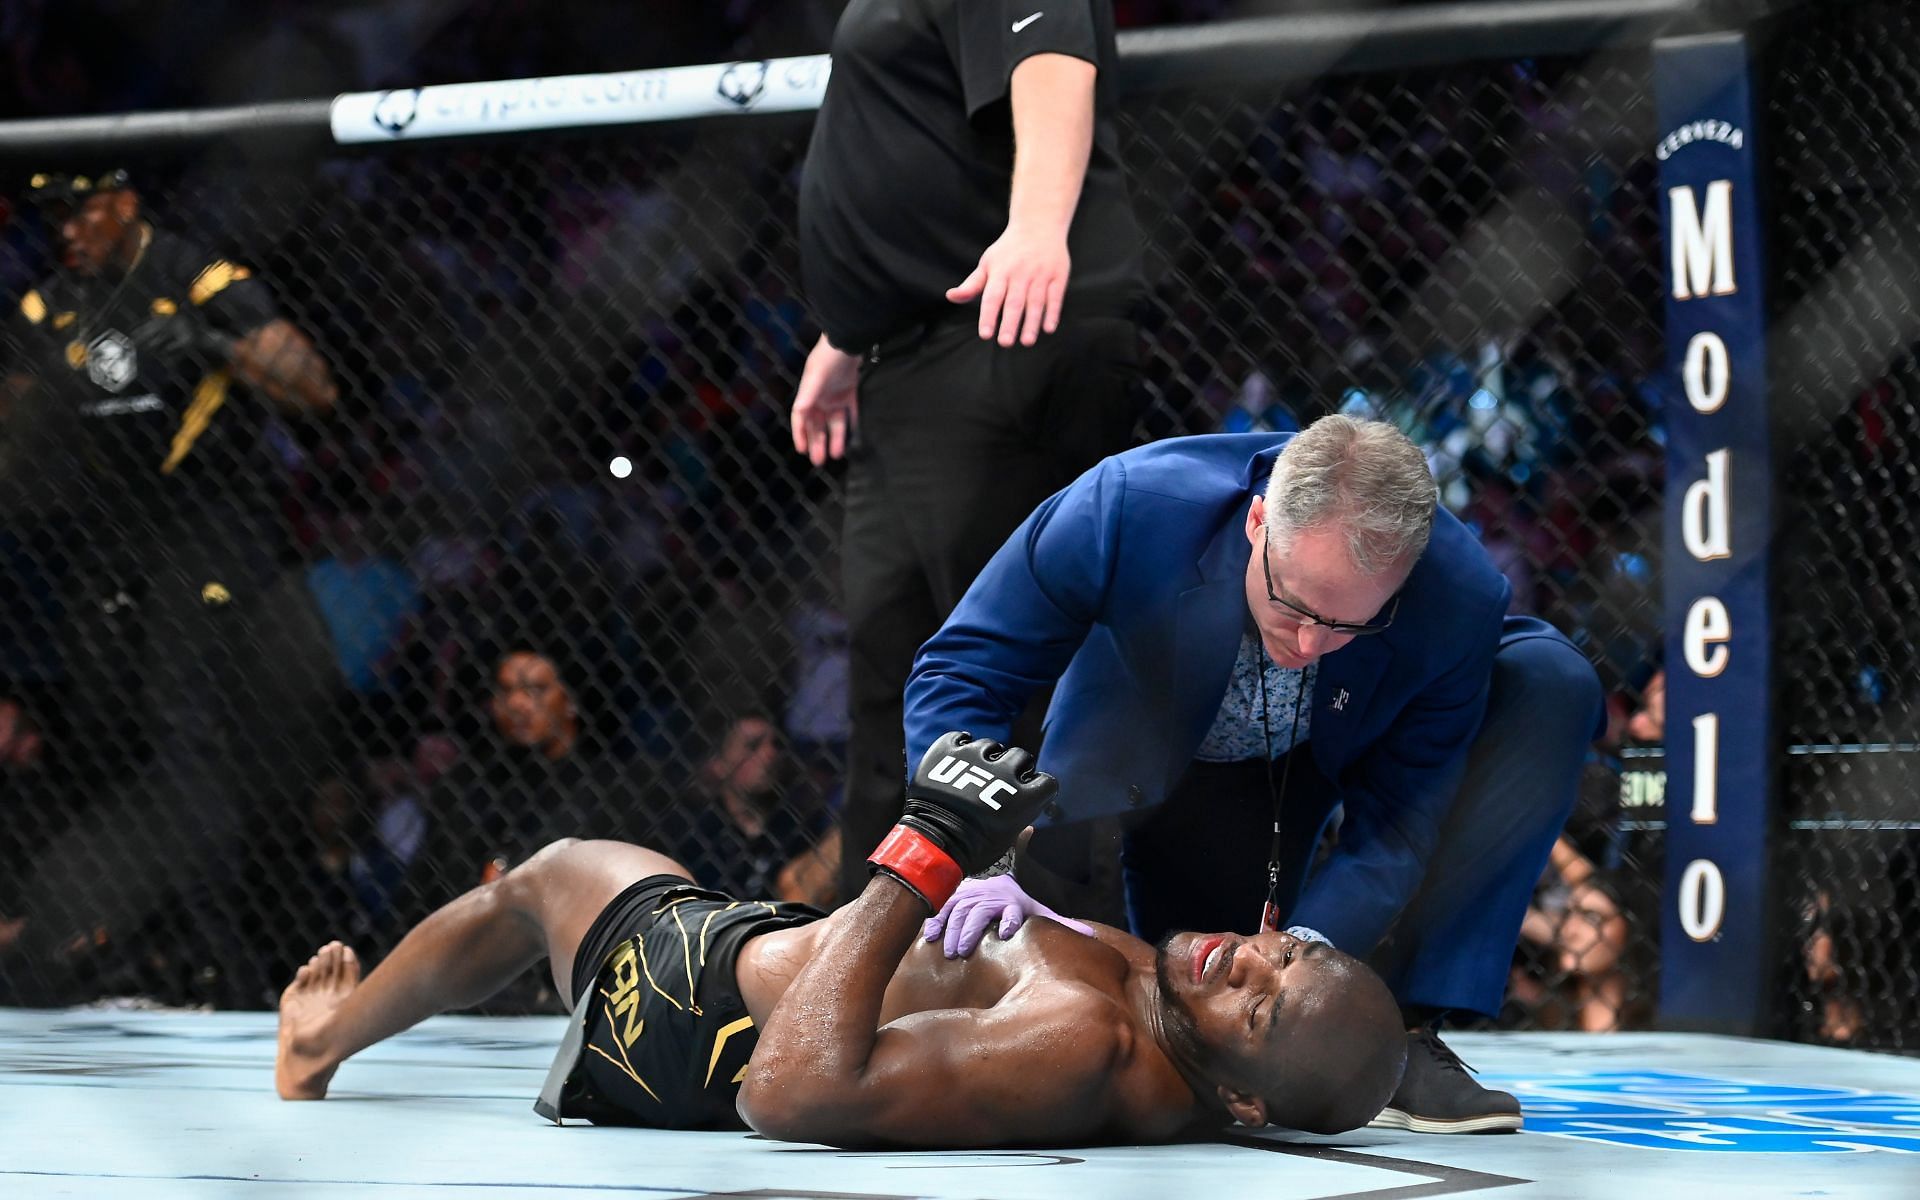 Kamaru Usman on the canvas after being knocked out by Leon Edwards